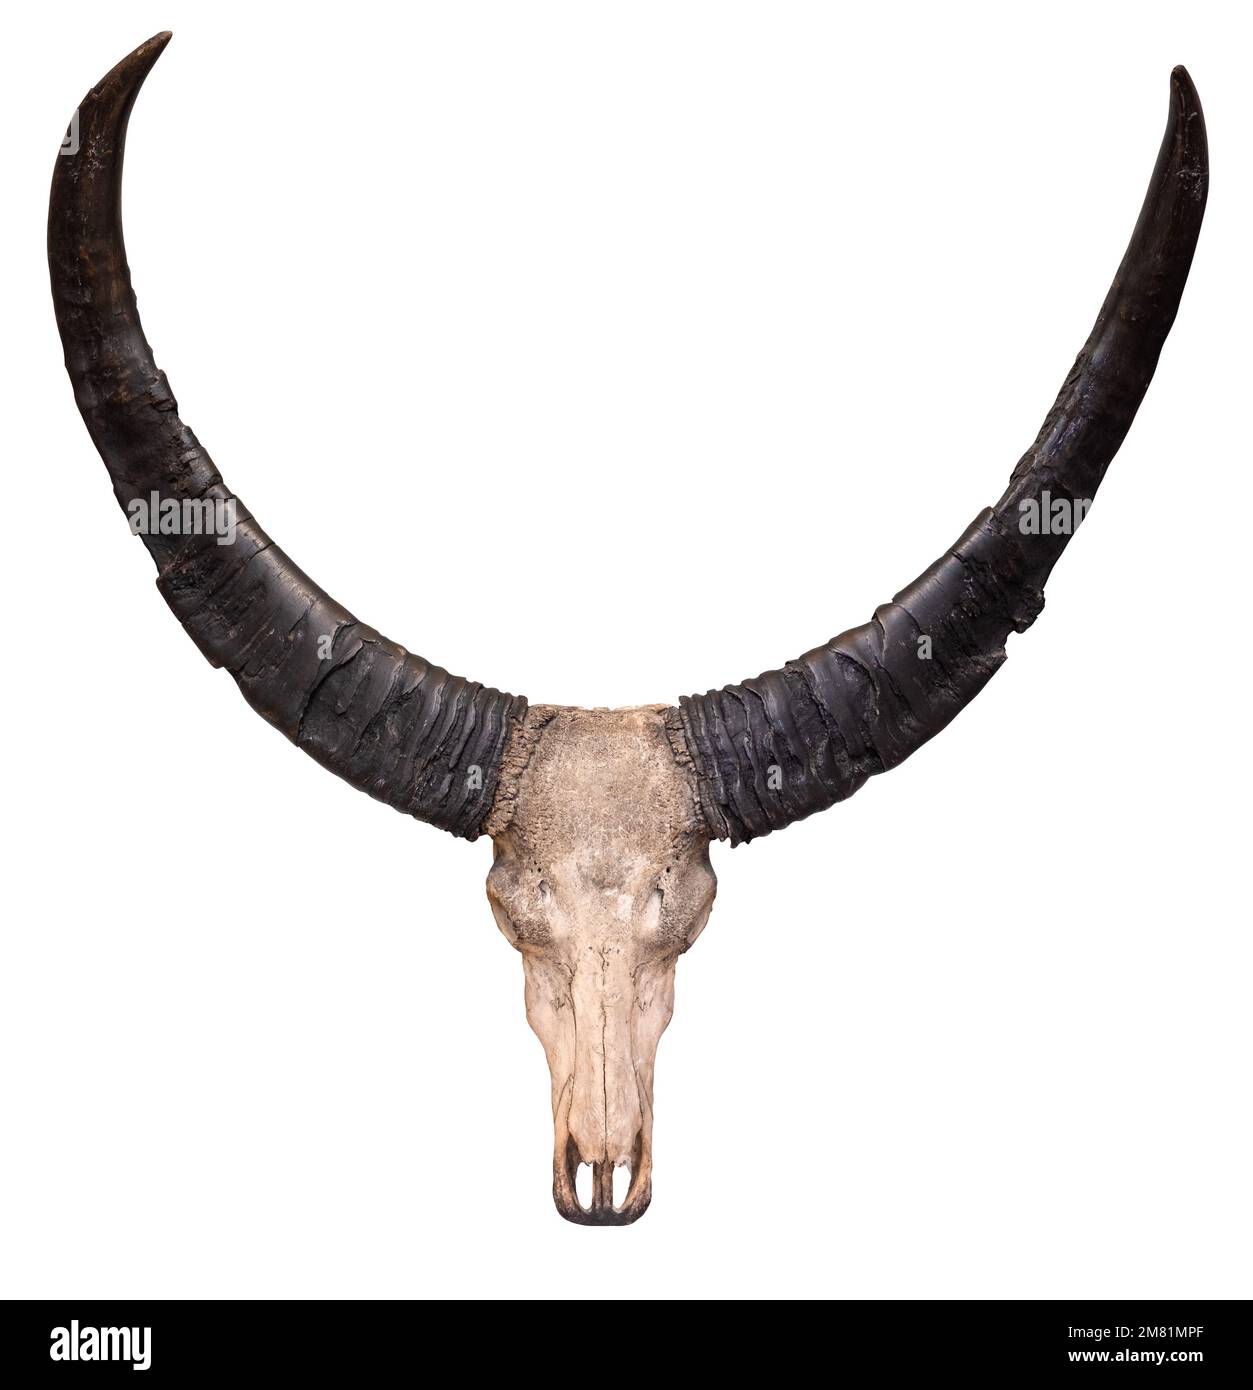 Skull And Horns Of A Cow Isolated On A White Background Stock Photo